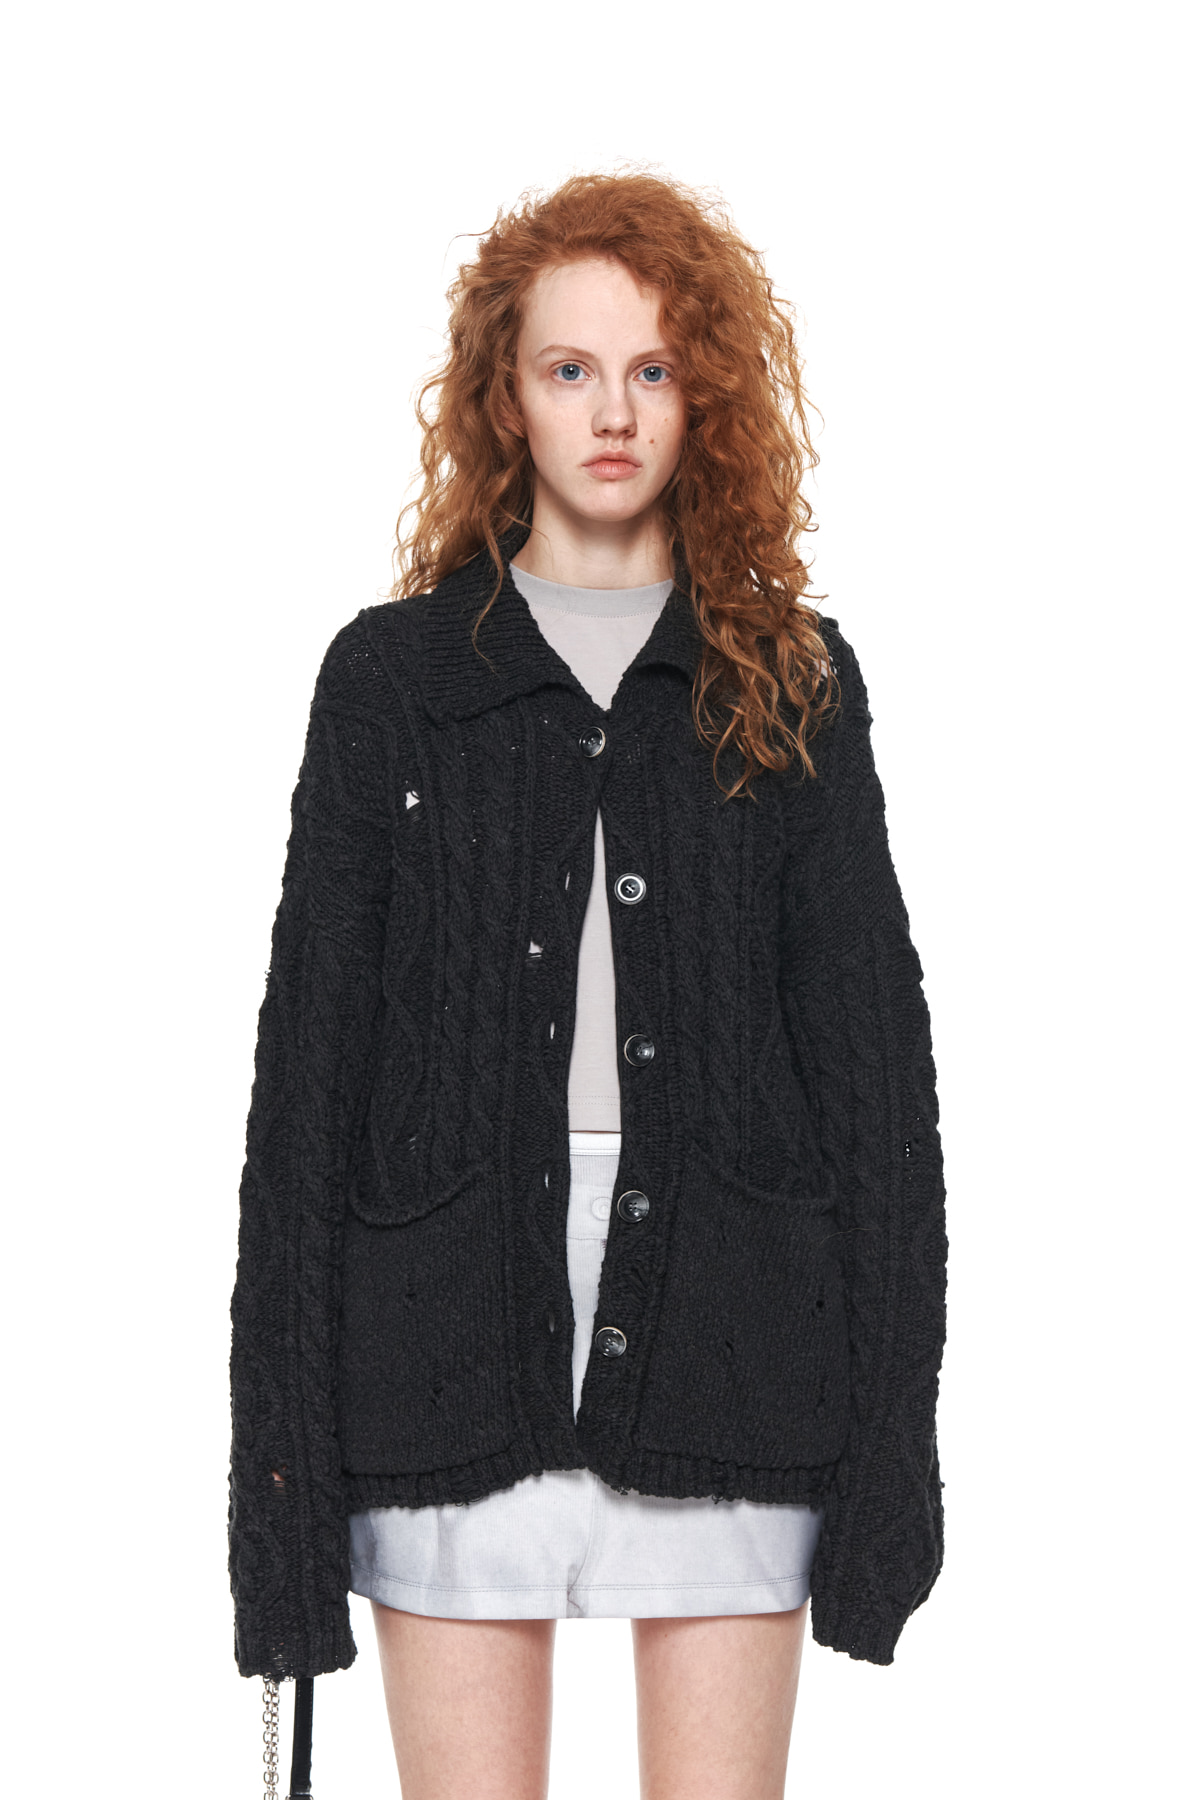 DAMAGE CABLE CARDIGAN IN CHARCOAL